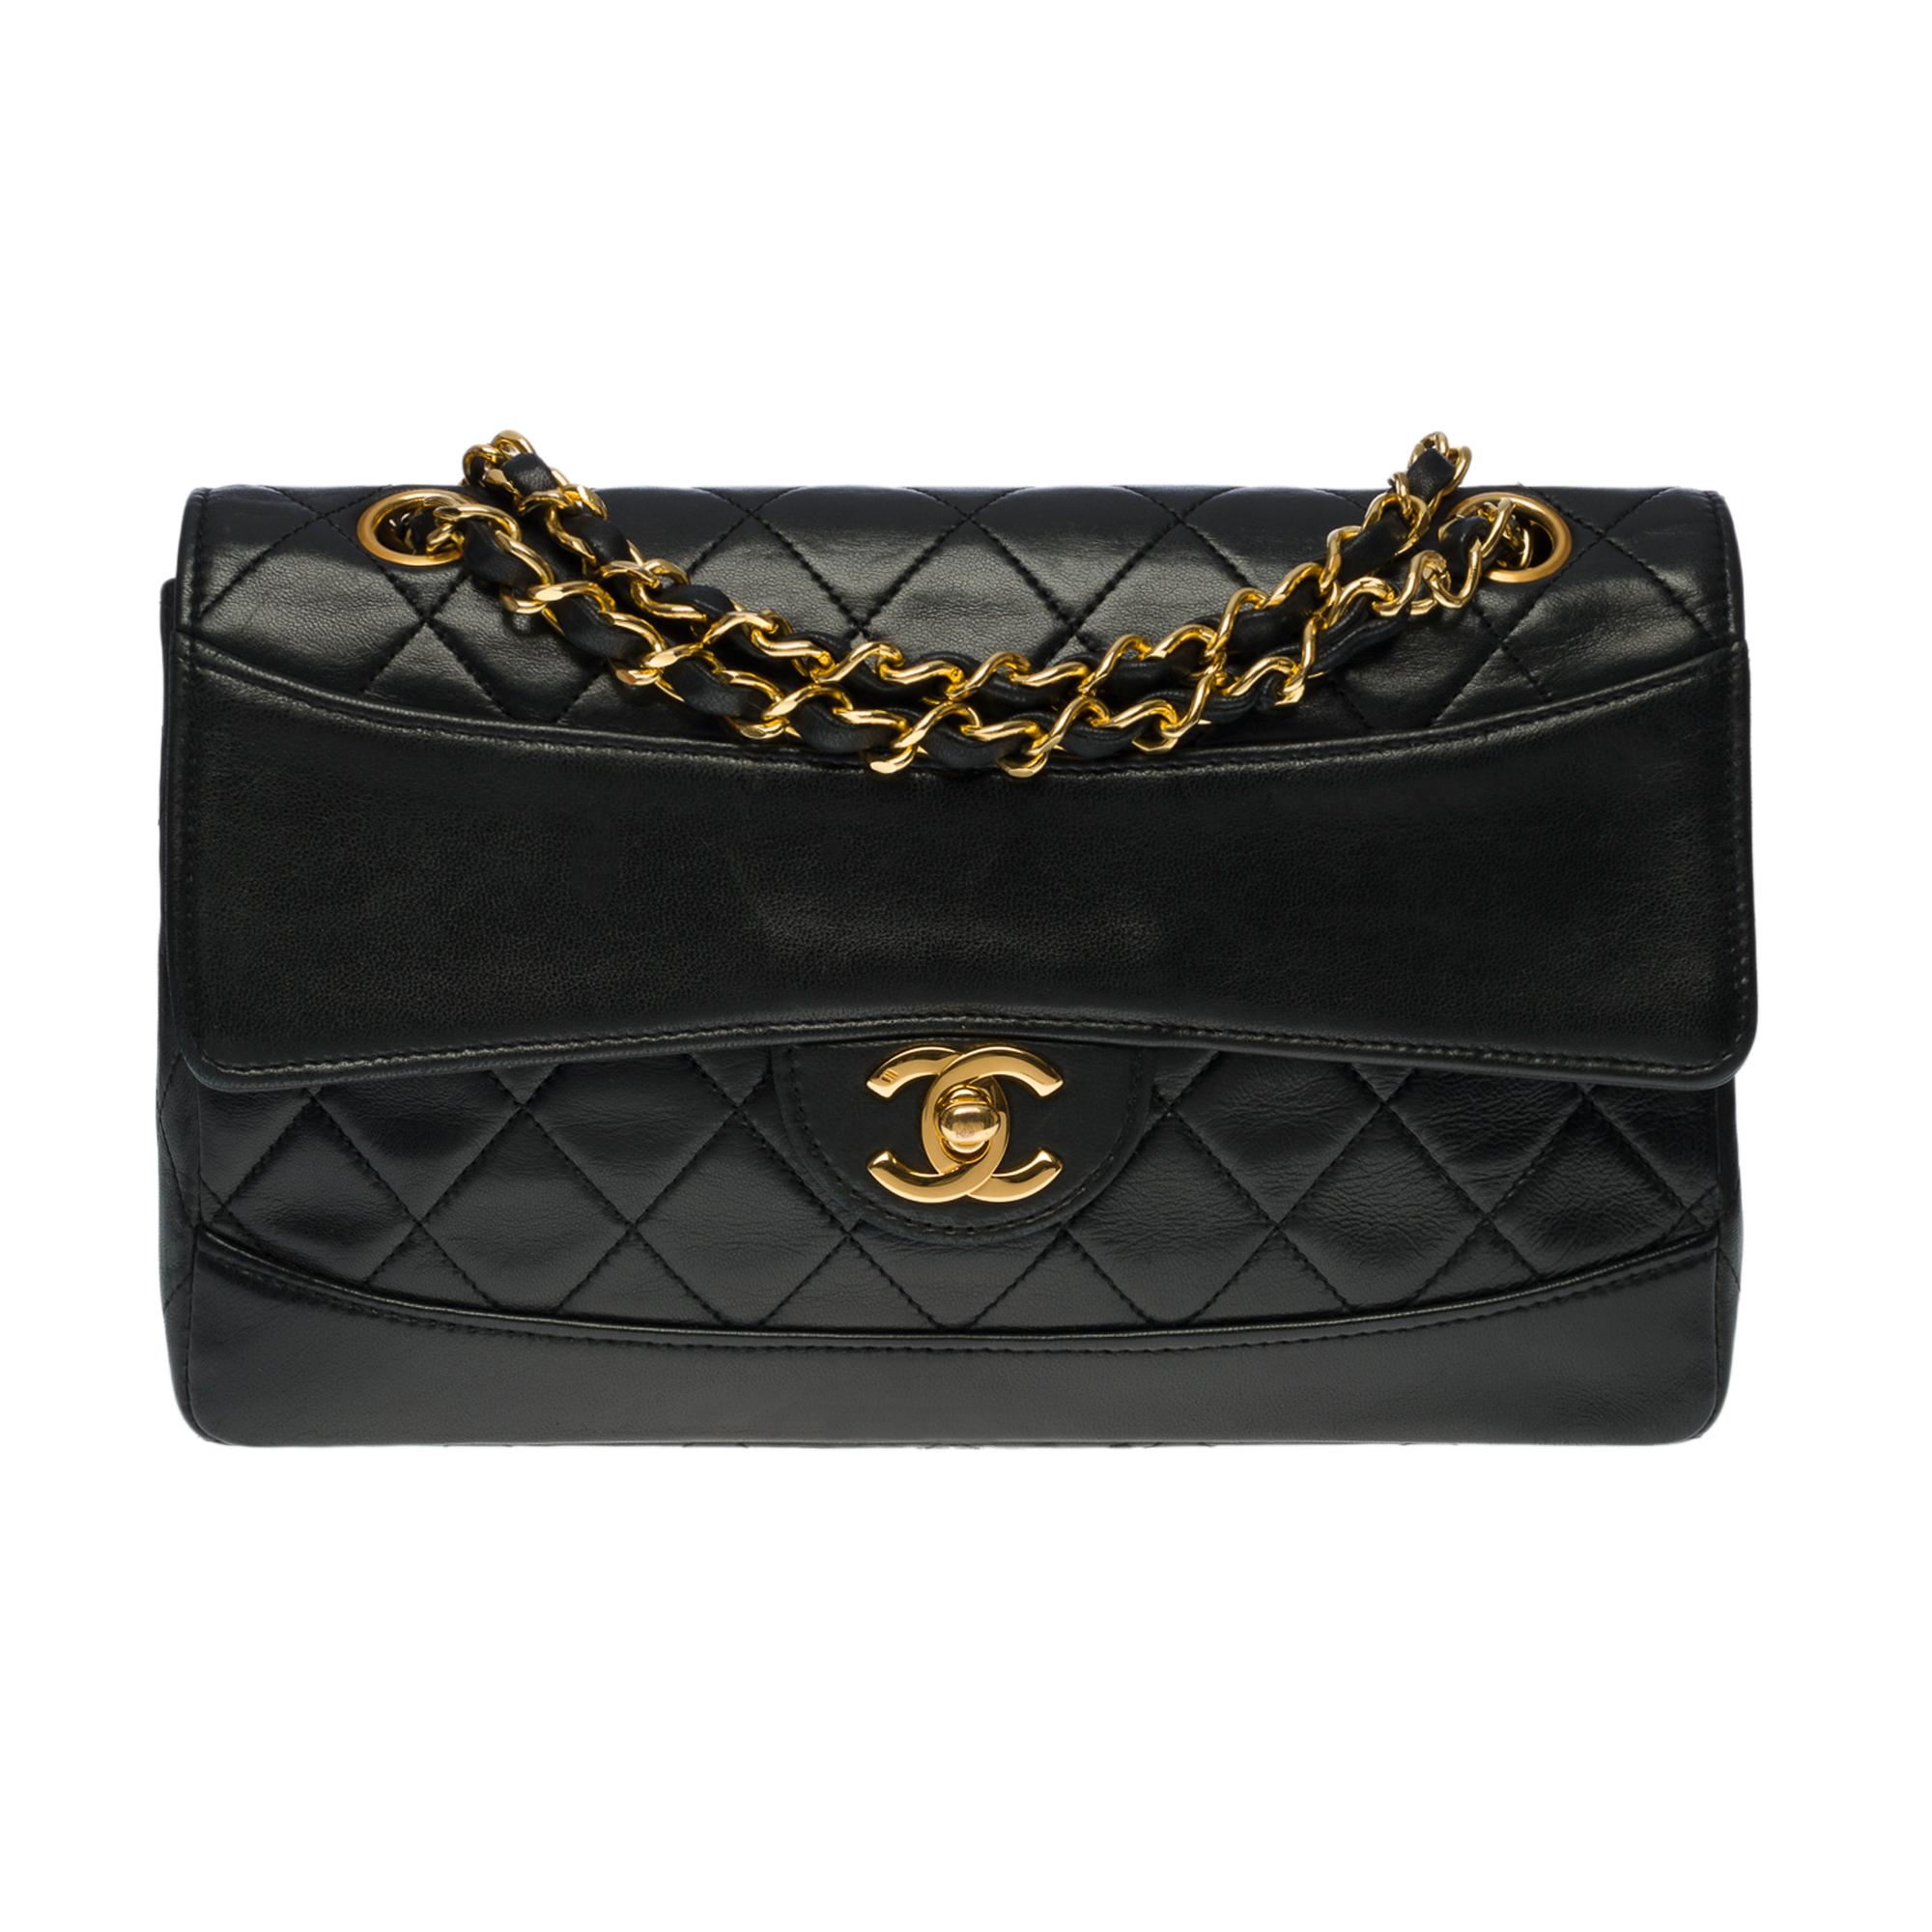 Beautiful Chanel Timeless/Classic Flap bag 23 cm in black quilted leather, gold-tone hardware, a gold-tone metal chain handle interlaced with black leather for a shoulder and shoulder strap, a dissociable black quilted leather pouch
Backpack